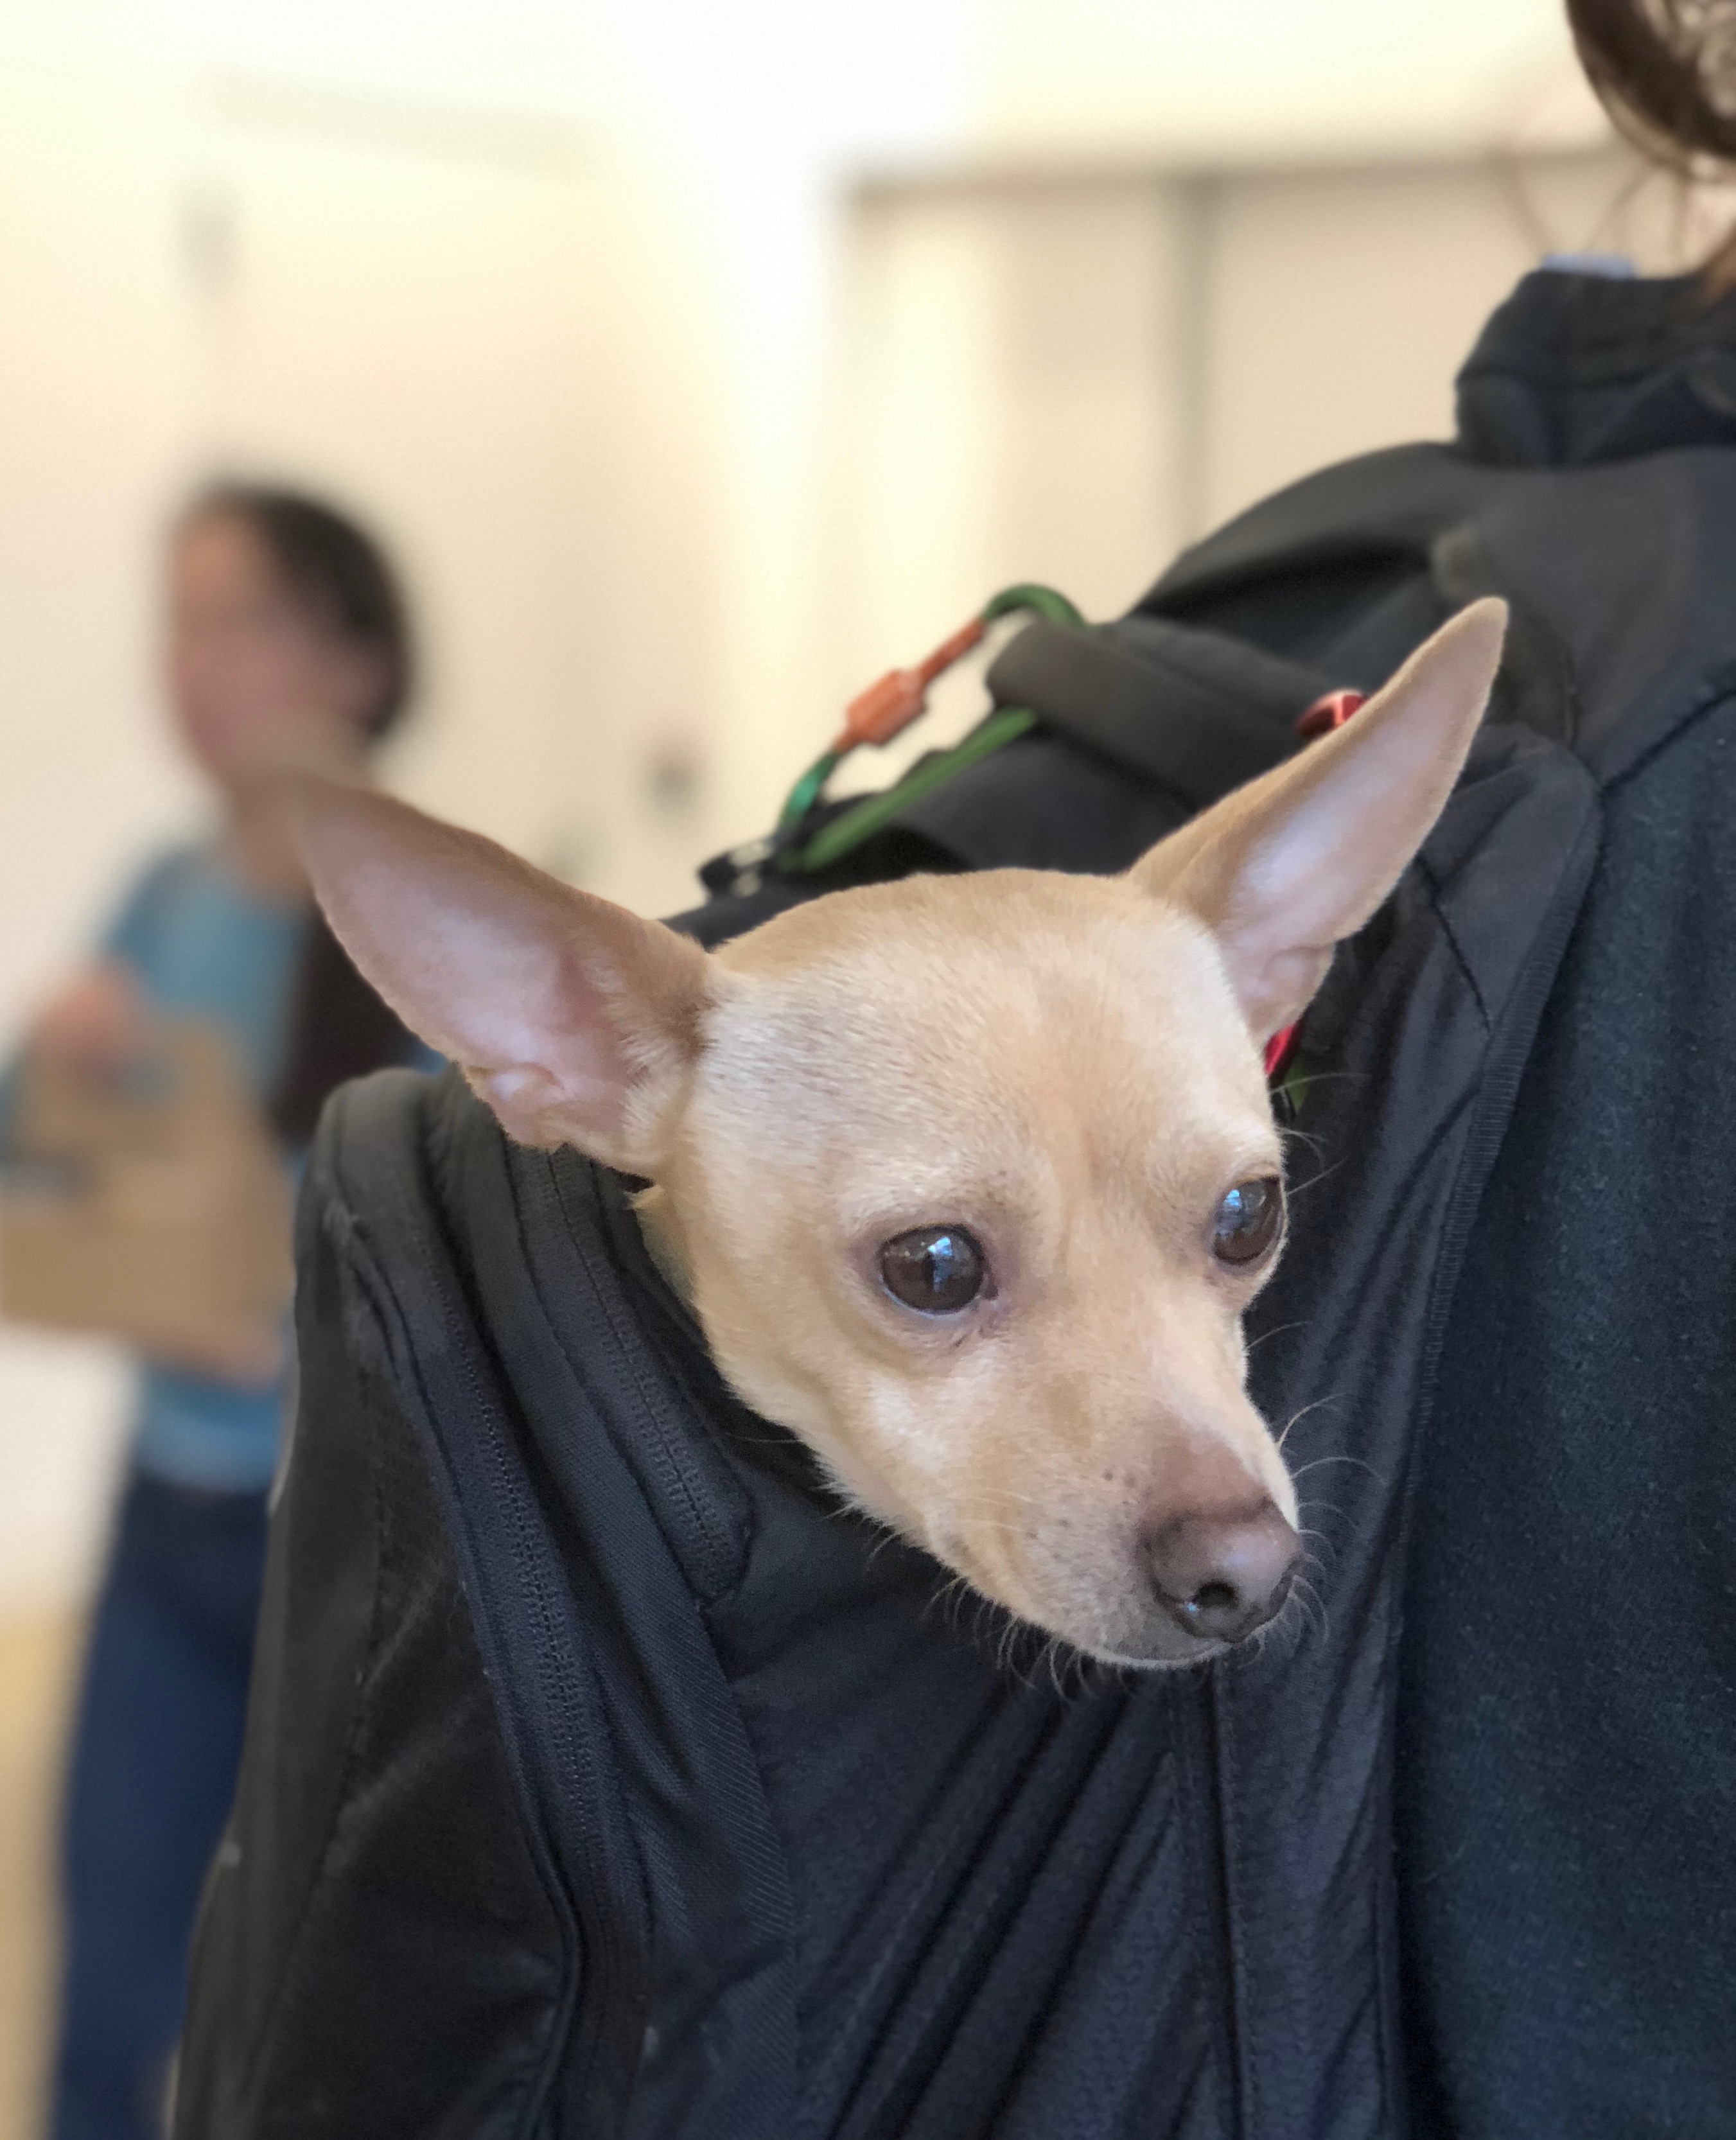 Terrier Chihuahua Mix Poking His Head Out Of A Backpack